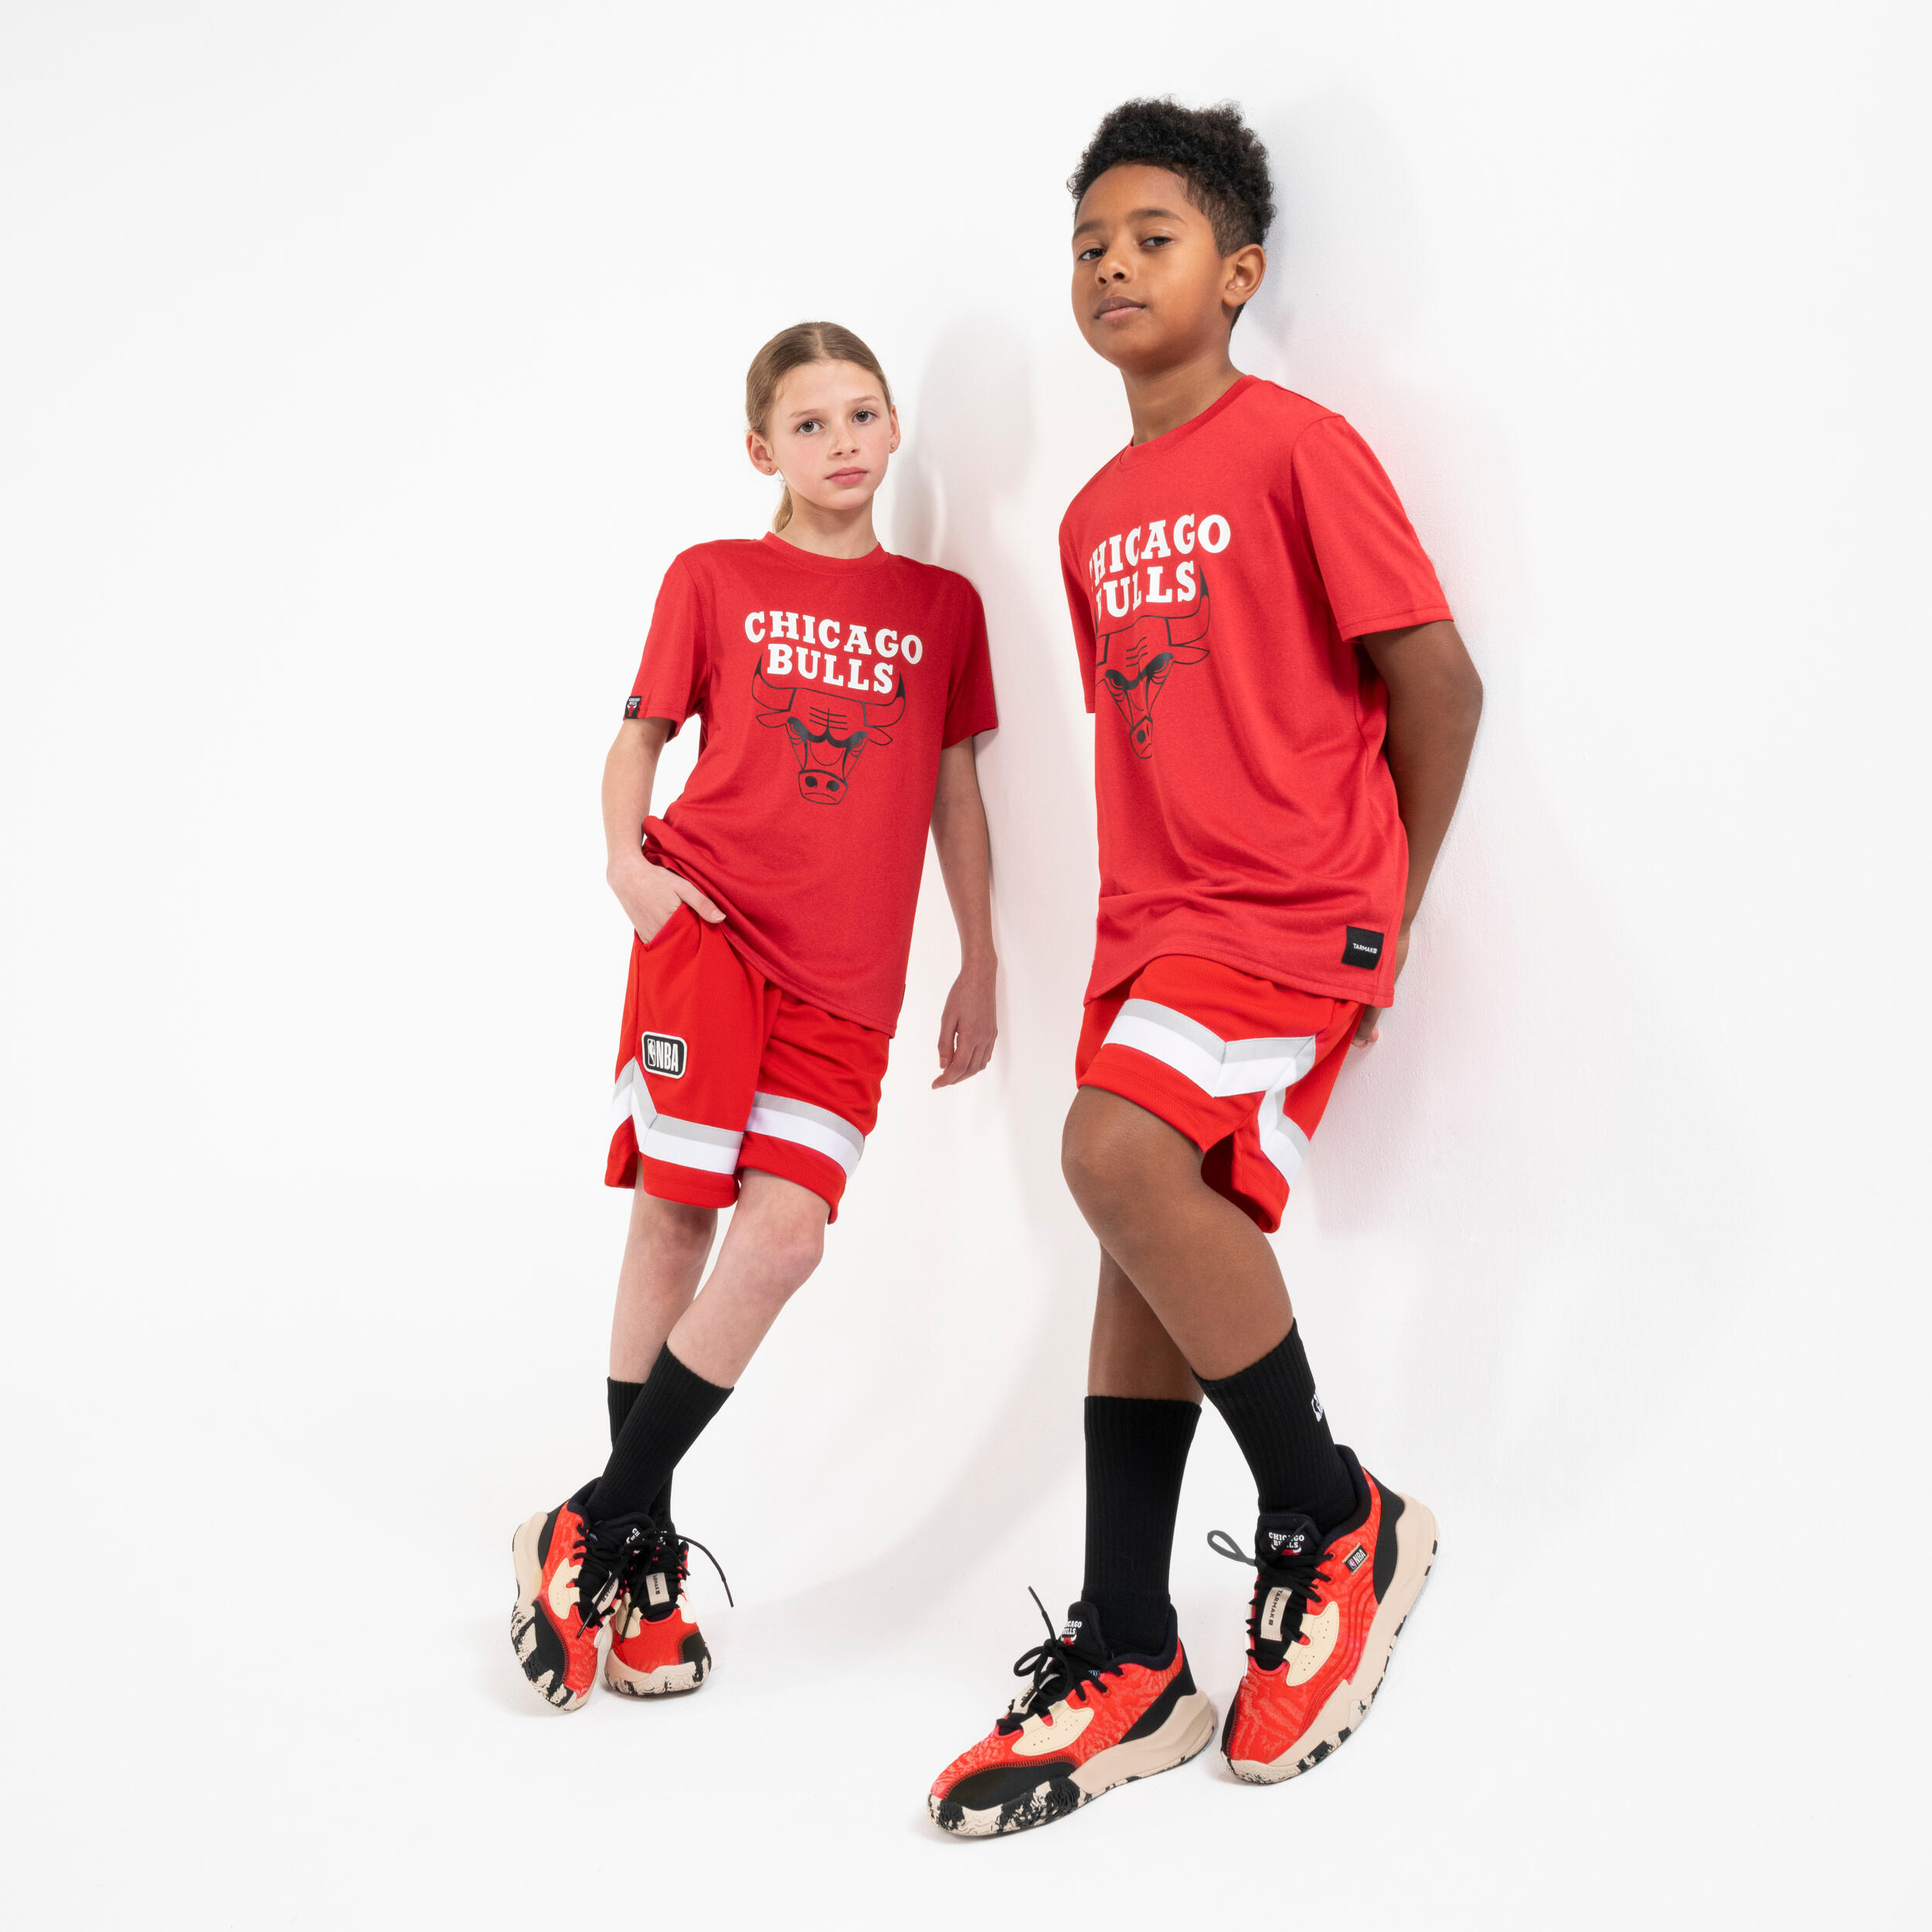 Kids' Basketball Shoes Fast 900 Low-1 - NBA Chicago Bulls/Red 2/10